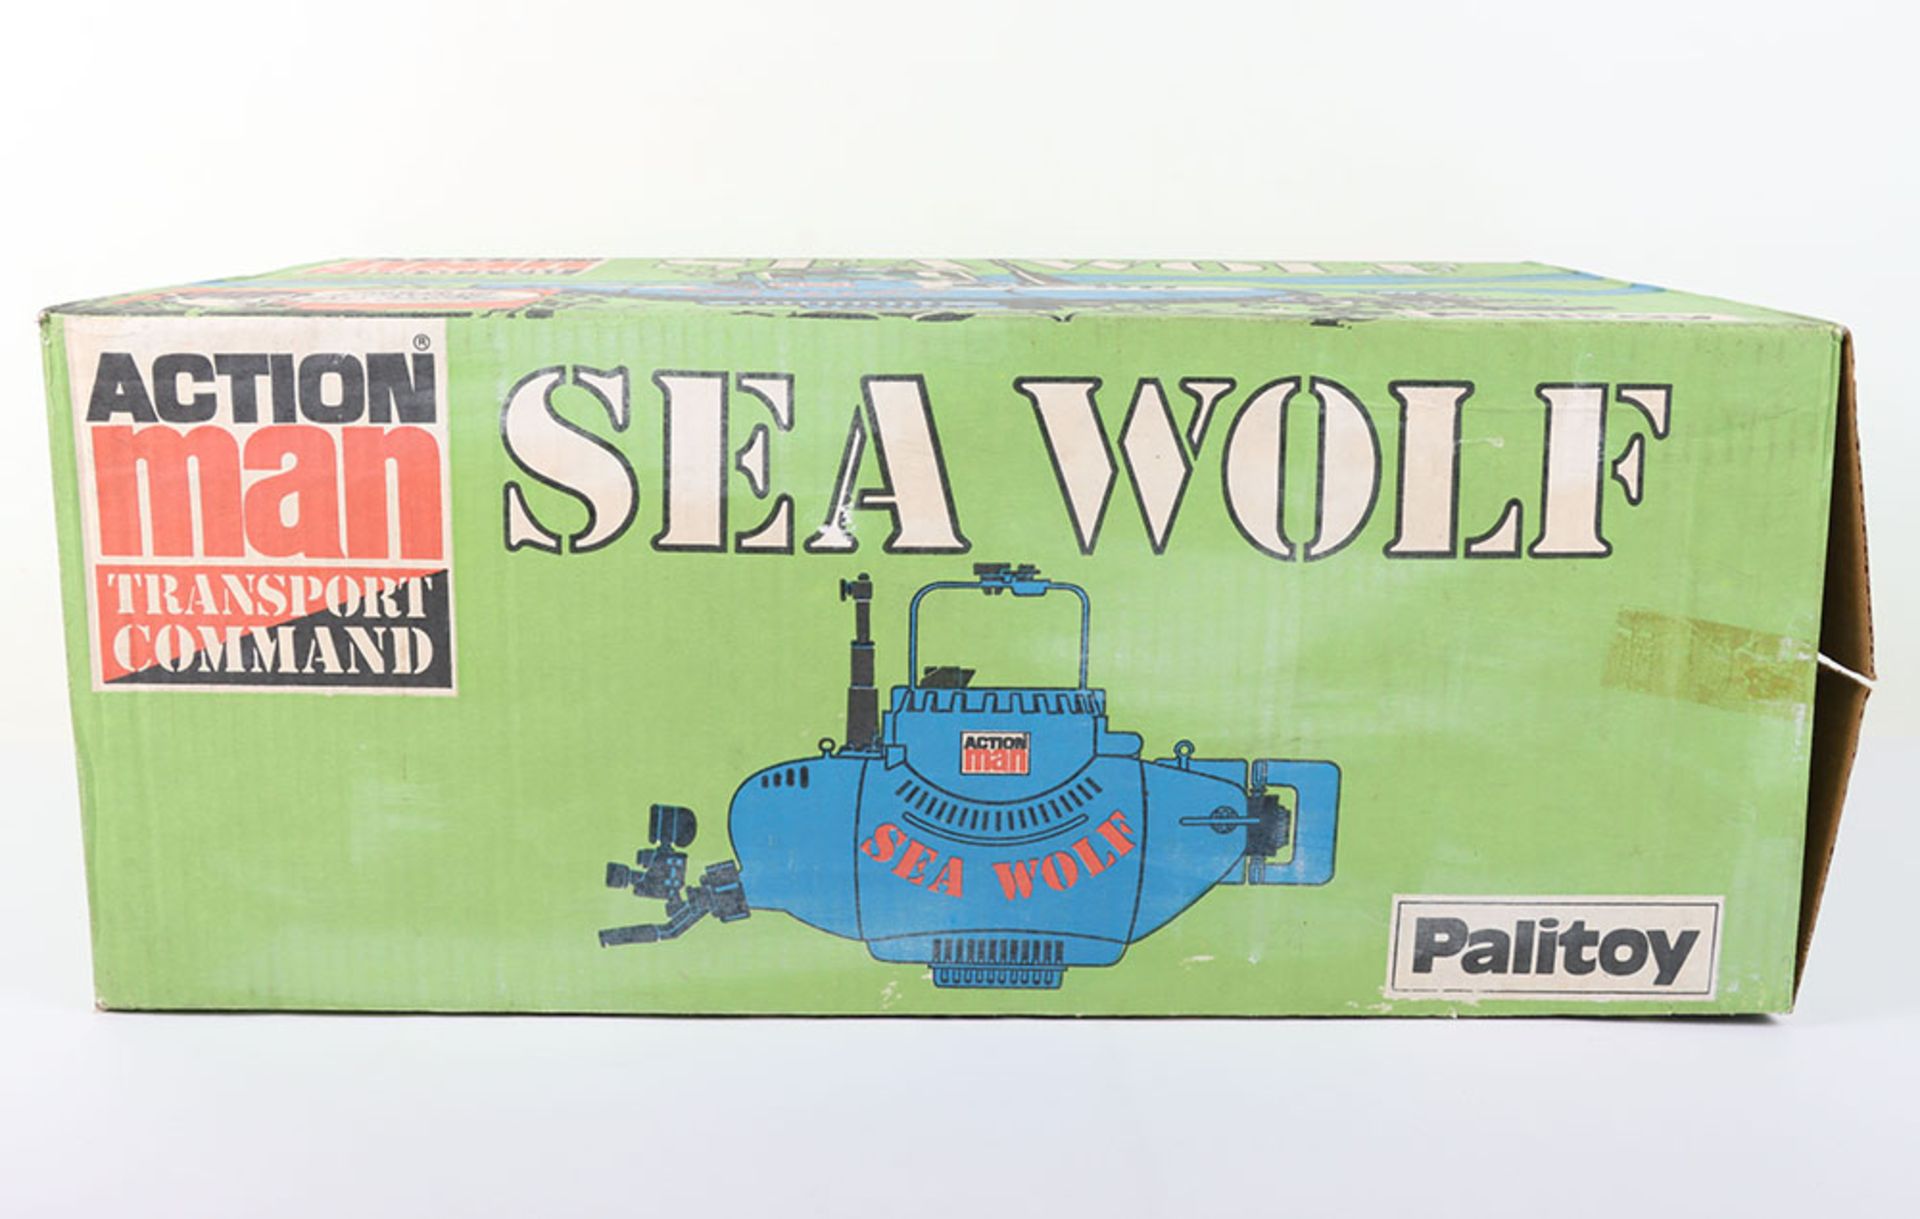 Palitoy Action Man Sea Wolf - Image 4 of 7